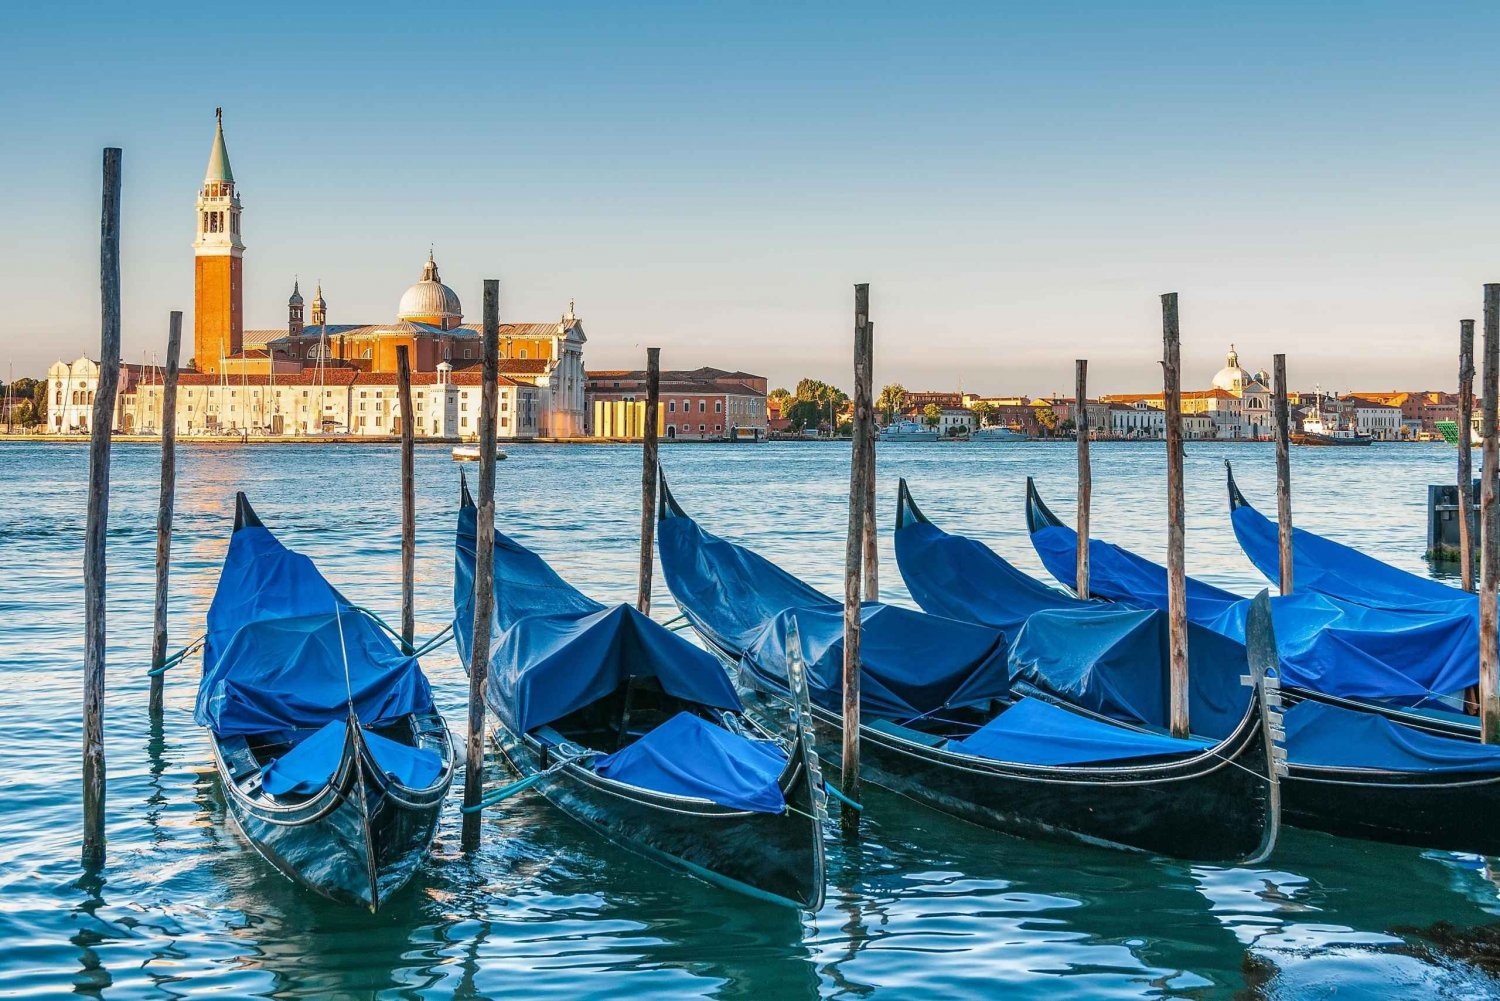 Venice: Gondola Meet and Share with App Commentary